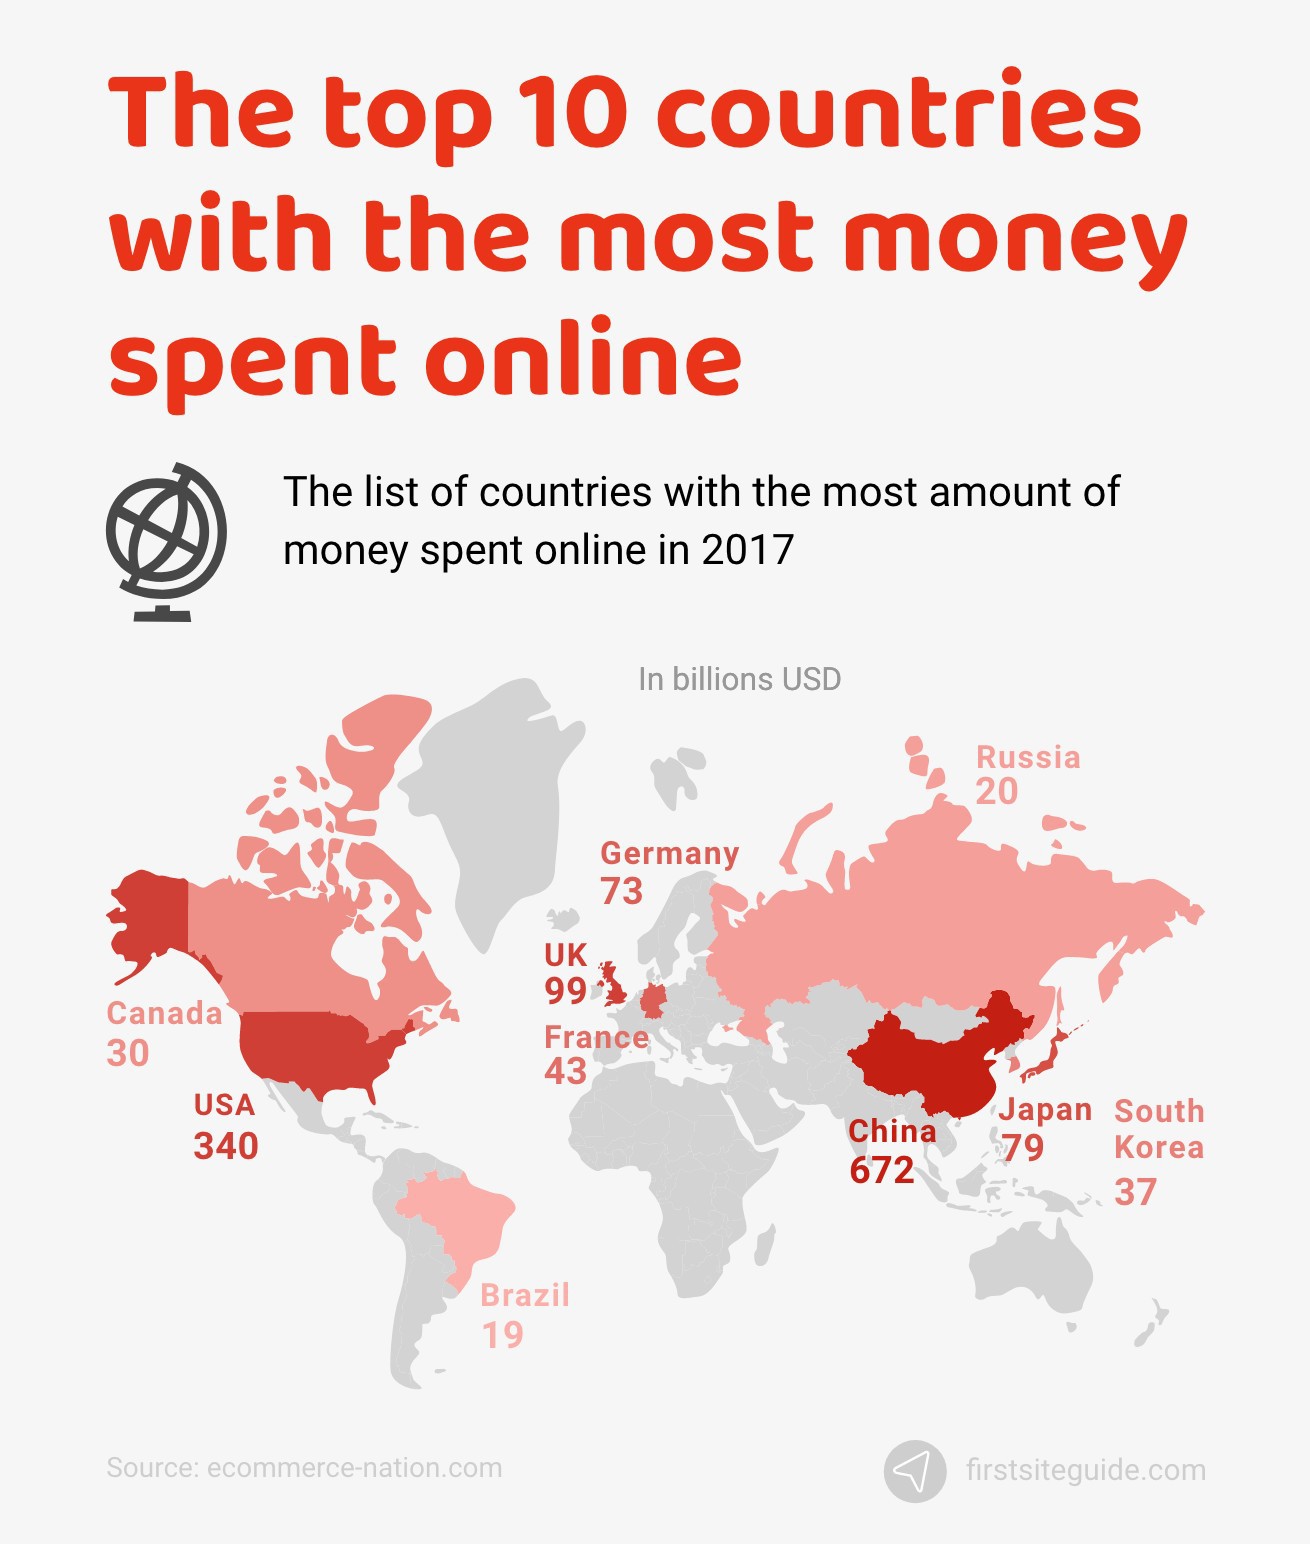 The top 10 countries with the most money spent online